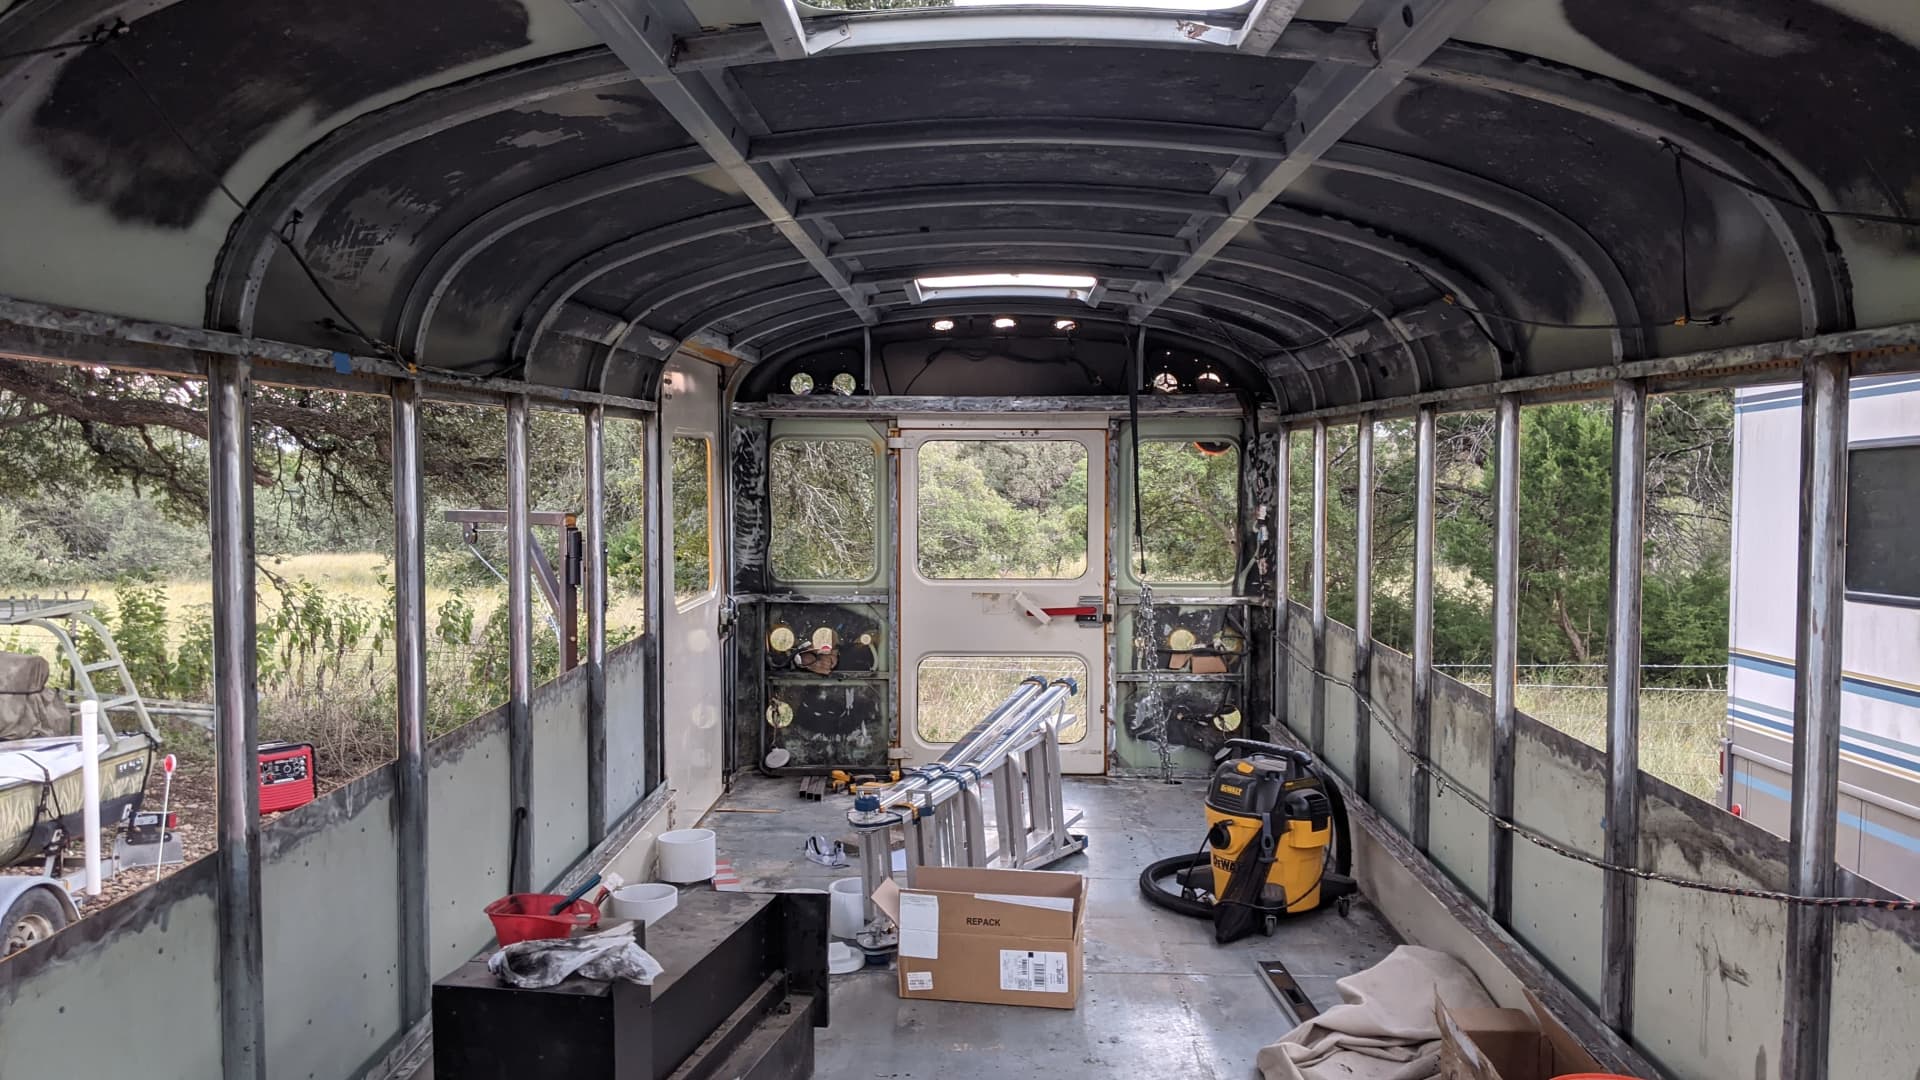 Everdeen and Jay bought their school bus from a government auction in January 2020. It cost them around $85,000 to renovate it into a customized living space.